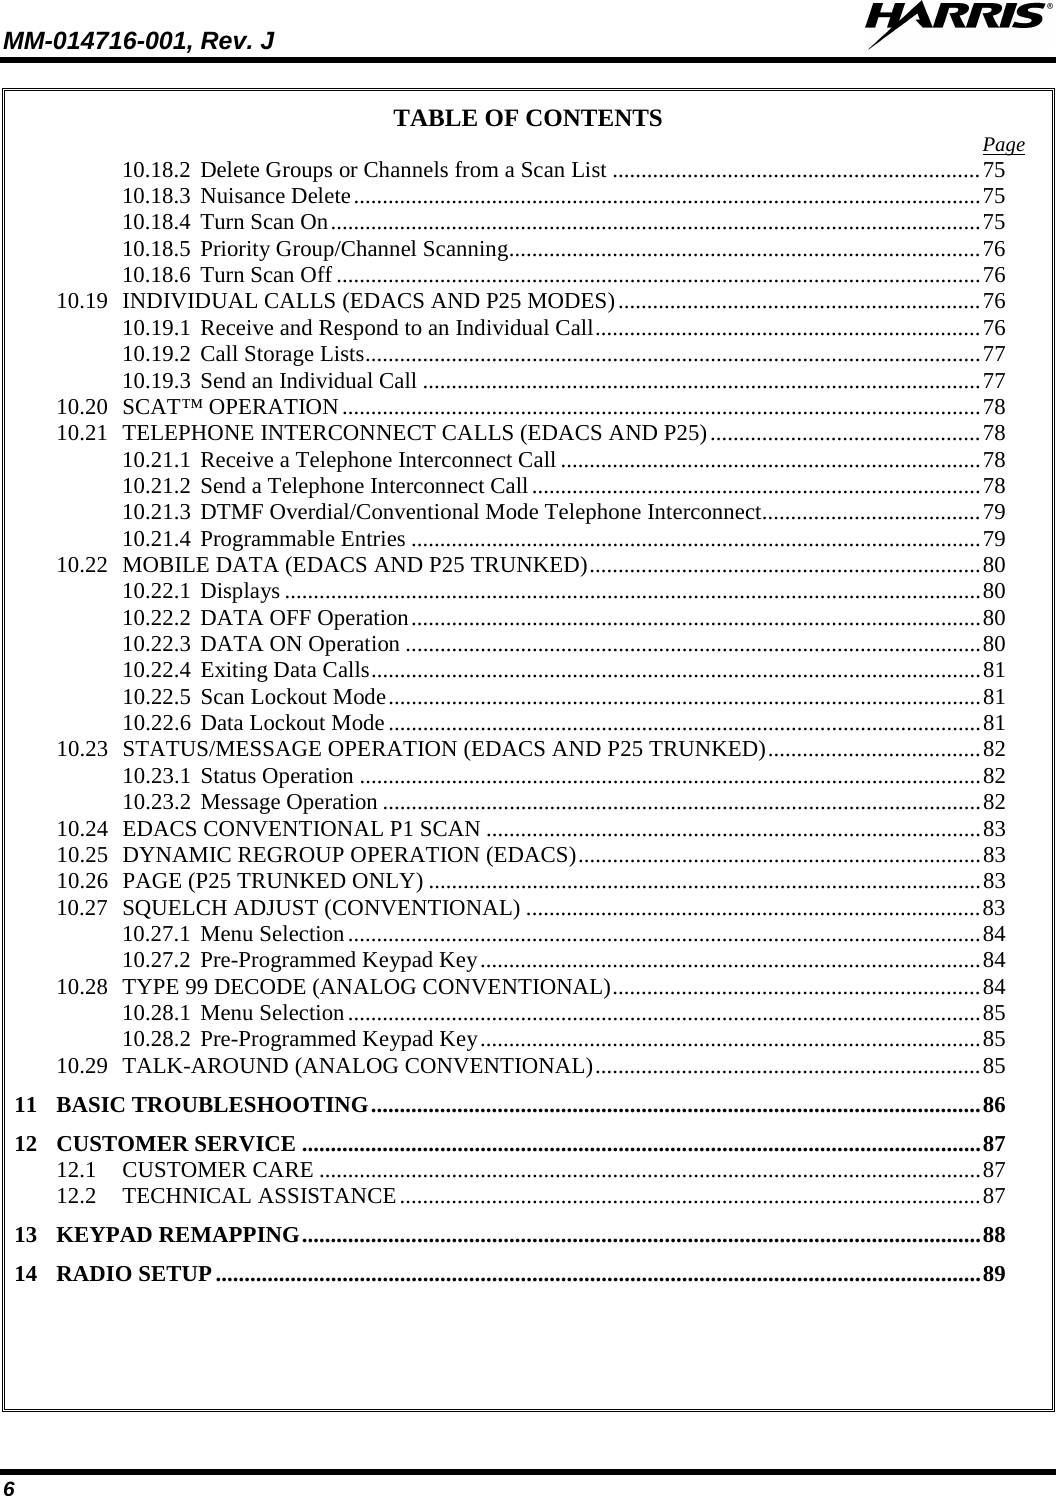 MM-014716-001, Rev. J  6 TABLE OF CONTENTS Page 10.18.2 Delete Groups or Channels from a Scan List ................................................................ 75 10.18.3 Nuisance Delete ............................................................................................................. 75 10.18.4 Turn Scan On ................................................................................................................. 75 10.18.5 Priority Group/Channel Scanning .................................................................................. 76 10.18.6 Turn Scan Off ................................................................................................................ 76 10.19 INDIVIDUAL CALLS (EDACS AND P25 MODES) ............................................................... 76 10.19.1 Receive and Respond to an Individual Call ................................................................... 76 10.19.2 Call Storage Lists ........................................................................................................... 77 10.19.3 Send an Individual Call ................................................................................................. 77 10.20 SCAT™ OPERATION ............................................................................................................... 78 10.21 TELEPHONE INTERCONNECT CALLS (EDACS AND P25) ............................................... 78 10.21.1 Receive a Telephone Interconnect Call ......................................................................... 78 10.21.2 Send a Telephone Interconnect Call .............................................................................. 78 10.21.3 DTMF Overdial/Conventional Mode Telephone Interconnect ...................................... 79 10.21.4 Programmable Entries ................................................................................................... 79 10.22 MOBILE DATA (EDACS AND P25 TRUNKED) .................................................................... 80 10.22.1 Displays ......................................................................................................................... 80 10.22.2 DATA OFF Operation ................................................................................................... 80 10.22.3 DATA ON Operation .................................................................................................... 80 10.22.4 Exiting Data Calls .......................................................................................................... 81 10.22.5 Scan Lockout Mode ....................................................................................................... 81 10.22.6 Data Lockout Mode ....................................................................................................... 81 10.23 STATUS/MESSAGE OPERATION (EDACS AND P25 TRUNKED) ..................................... 82 10.23.1 Status Operation ............................................................................................................ 82 10.23.2 Message Operation ........................................................................................................ 82 10.24 EDACS CONVENTIONAL P1 SCAN ...................................................................................... 83 10.25 DYNAMIC REGROUP OPERATION (EDACS) ...................................................................... 83 10.26 PAGE (P25 TRUNKED ONLY) ................................................................................................ 83 10.27 SQUELCH ADJUST (CONVENTIONAL) ............................................................................... 83 10.27.1 Menu Selection .............................................................................................................. 84 10.27.2 Pre-Programmed Keypad Key ....................................................................................... 84 10.28 TYPE 99 DECODE (ANALOG CONVENTIONAL) ................................................................ 84 10.28.1 Menu Selection .............................................................................................................. 85 10.28.2 Pre-Programmed Keypad Key ....................................................................................... 85 10.29 TALK-AROUND (ANALOG CONVENTIONAL) ................................................................... 85 11 BASIC TROUBLESHOOTING .......................................................................................................... 86 12 CUSTOMER SERVICE ...................................................................................................................... 87 12.1 CUSTOMER CARE ................................................................................................................... 87 12.2 TECHNICAL ASSISTANCE ..................................................................................................... 87 13 KEYPAD REMAPPING ...................................................................................................................... 88 14 RADIO SETUP ..................................................................................................................................... 89     